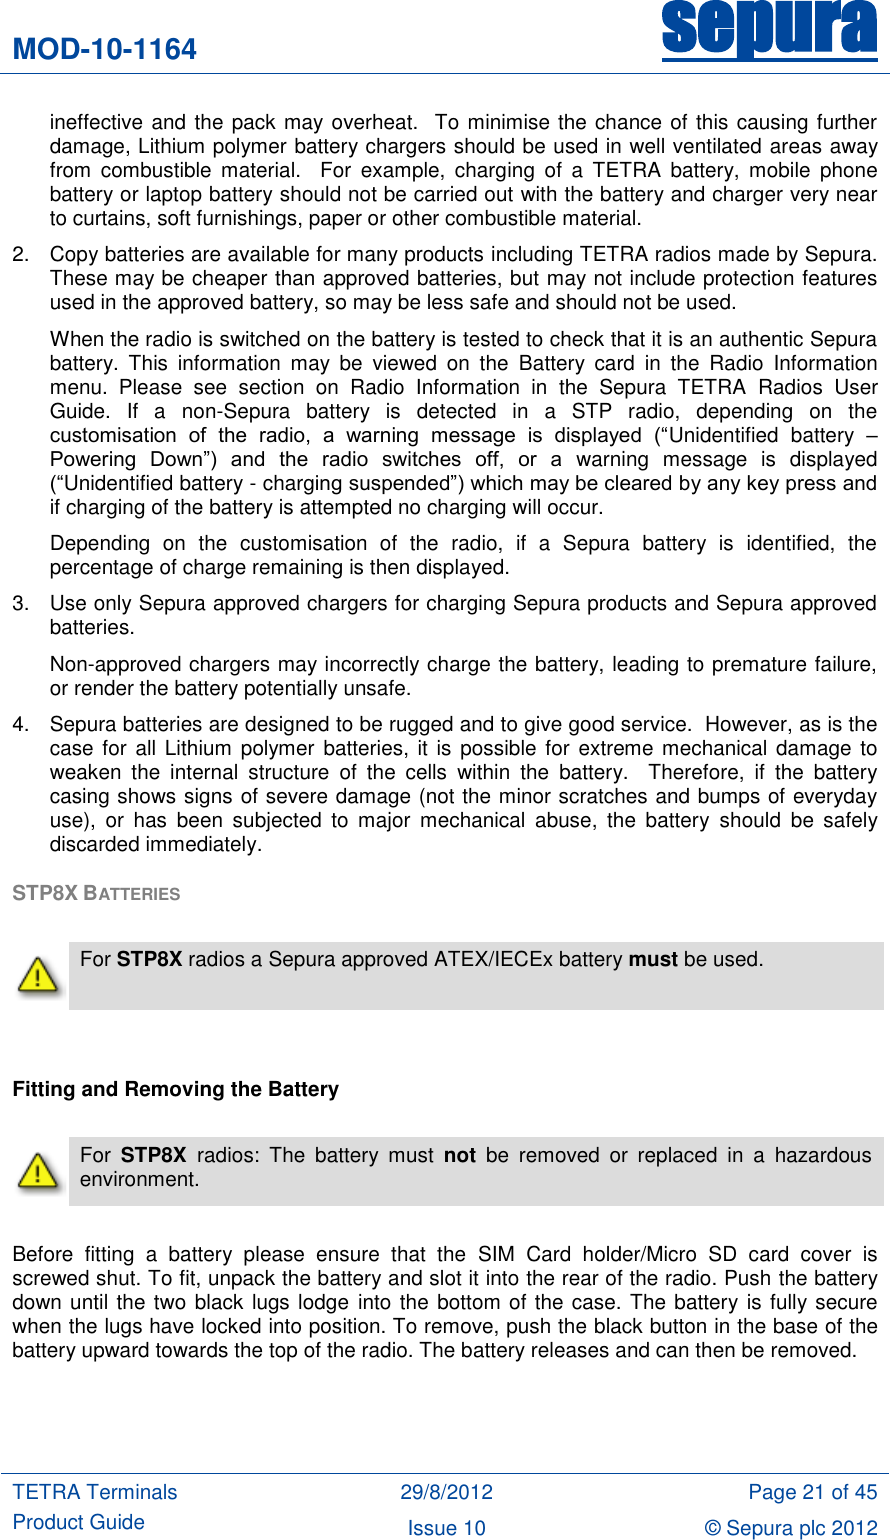 MOD-10-1164 sepura  TETRA Terminals Product Guide 29/8/2012 Page 21 of 45 Issue 10 © Sepura plc 2012   ineffective and the pack may overheat.  To minimise the chance of this causing further damage, Lithium polymer battery chargers should be used in well ventilated areas away from  combustible  material.    For  example,  charging  of  a  TETRA  battery,  mobile  phone battery or laptop battery should not be carried out with the battery and charger very near to curtains, soft furnishings, paper or other combustible material. 2.  Copy batteries are available for many products including TETRA radios made by Sepura.  These may be cheaper than approved batteries, but may not include protection features used in the approved battery, so may be less safe and should not be used.  When the radio is switched on the battery is tested to check that it is an authentic Sepura battery.  This  information  may  be  viewed  on  the  Battery  card  in  the  Radio  Information menu.  Please  see  section  on  Radio  Information  in  the  Sepura  TETRA  Radios  User Guide.  If  a  non-Sepura  battery  is  detected  in  a  STP  radio,  depending  on  the customisation  of  the  radio,  a  warning  message  is  displayed  (“Unidentified  battery  – Powering  Down”)  and  the  radio  switches  off,  or  a  warning  message  is  displayed (“Unidentified battery - charging suspended”) which may be cleared by any key press and if charging of the battery is attempted no charging will occur. Depending  on  the  customisation  of  the  radio,  if  a  Sepura  battery  is  identified,  the percentage of charge remaining is then displayed. 3.  Use only Sepura approved chargers for charging Sepura products and Sepura approved batteries.  Non-approved chargers may incorrectly charge the battery, leading to premature failure, or render the battery potentially unsafe.   4.  Sepura batteries are designed to be rugged and to give good service.  However, as is the case for  all Lithium polymer batteries, it is possible for  extreme mechanical damage to weaken  the  internal  structure  of  the  cells  within  the  battery.    Therefore,  if  the  battery casing shows signs of severe damage (not the minor scratches and bumps of everyday use),  or  has  been  subjected  to  major  mechanical  abuse,  the  battery  should  be  safely discarded immediately. STP8X BATTERIES    For STP8X radios a Sepura approved ATEX/IECEx battery must be used.   Fitting and Removing the Battery   For  STP8X  radios:  The  battery  must  not  be  removed  or  replaced  in  a  hazardous environment.  Before  fitting  a  battery  please  ensure  that  the  SIM  Card  holder/Micro  SD  card  cover  is screwed shut. To fit, unpack the battery and slot it into the rear of the radio. Push the battery down until the two black lugs lodge into the bottom of the case. The battery is fully secure when the lugs have locked into position. To remove, push the black button in the base of the battery upward towards the top of the radio. The battery releases and can then be removed.  